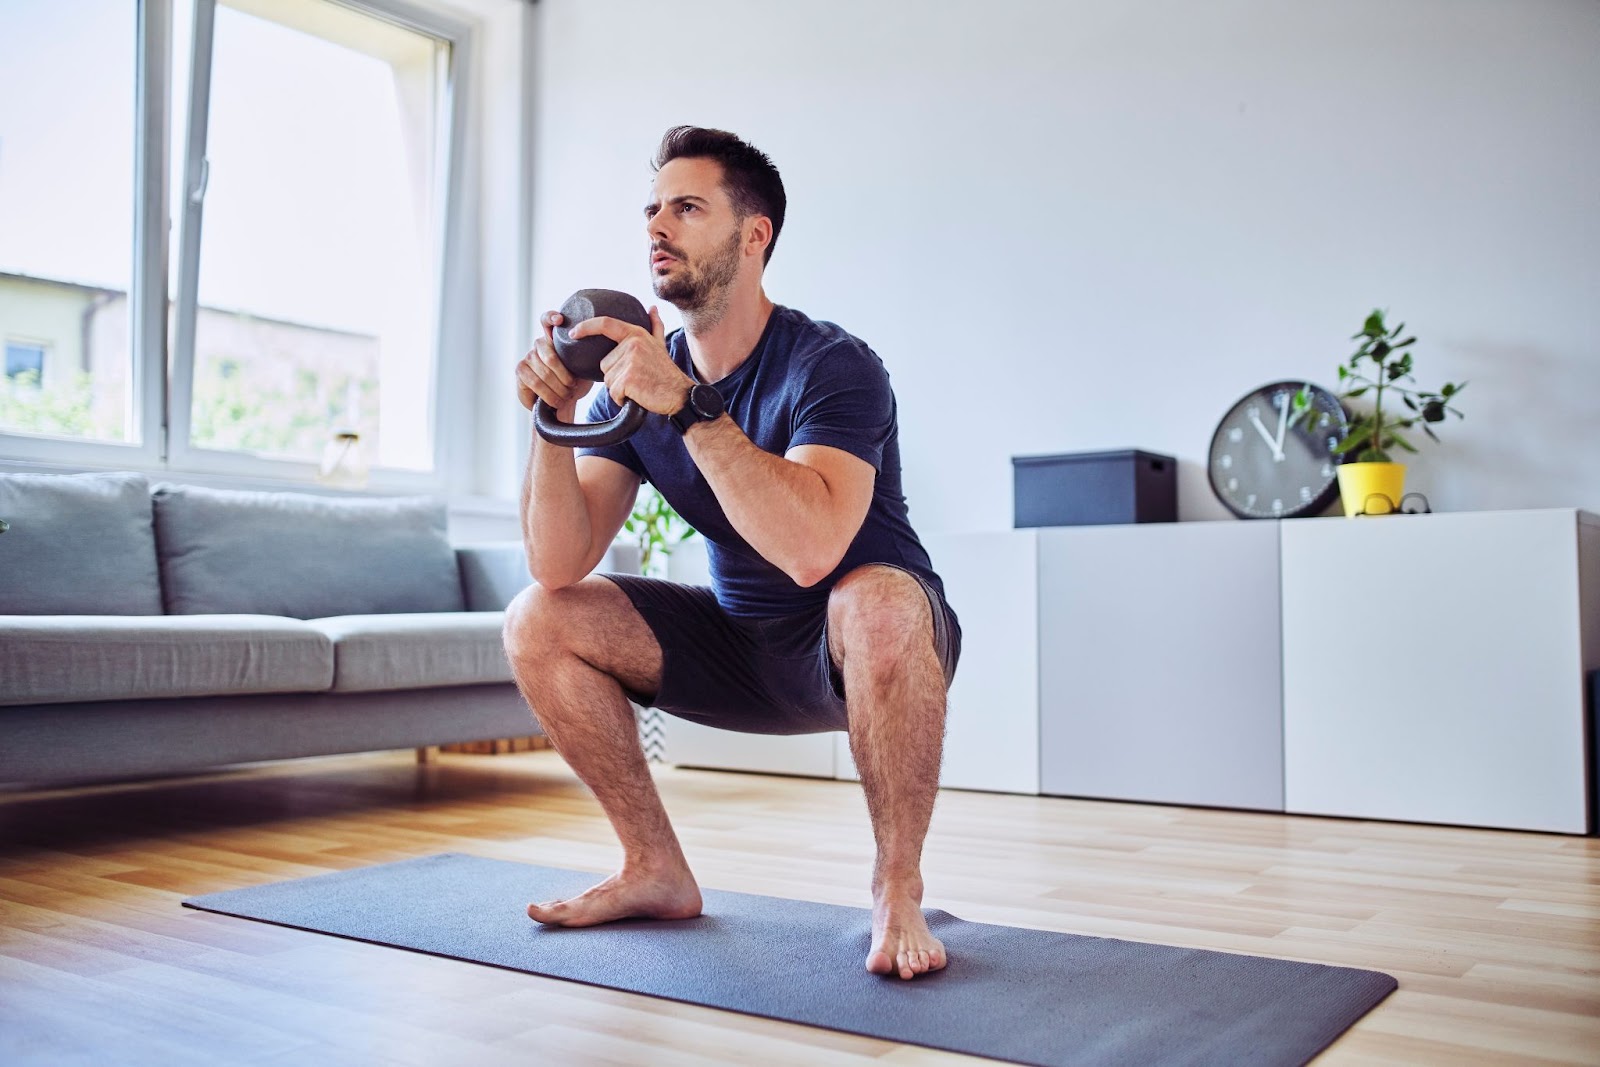 Man holding a kettlebell in the Goblet Squat position.